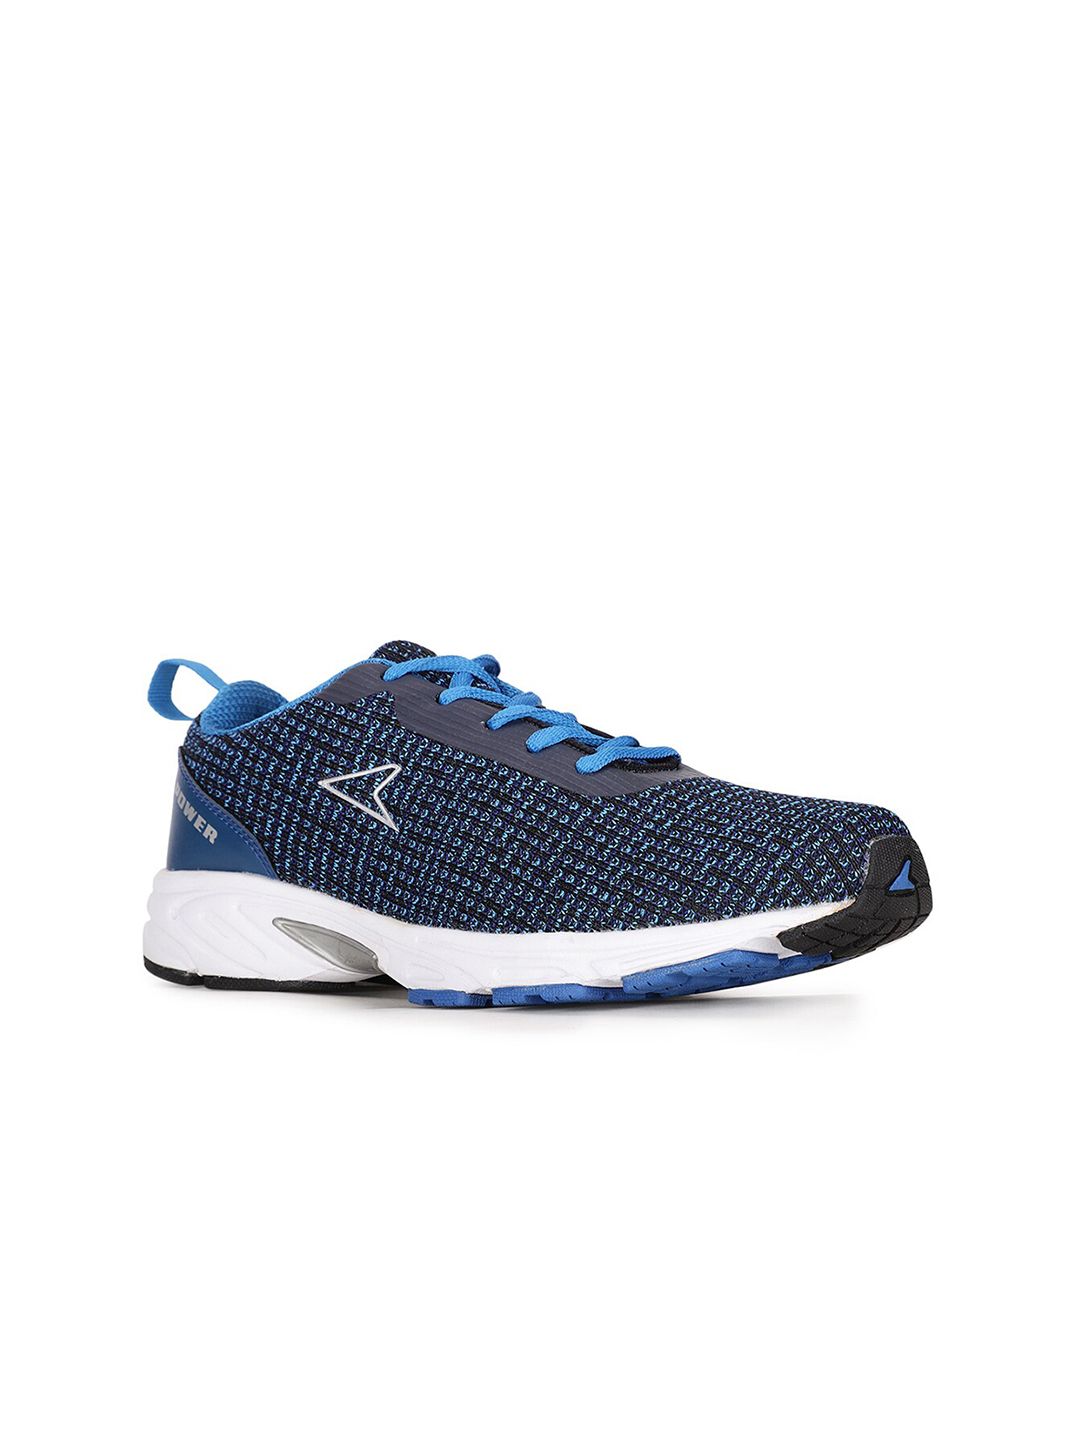 Power Women Blue Textile Training or Gym Non-Marking Shoes Price in India